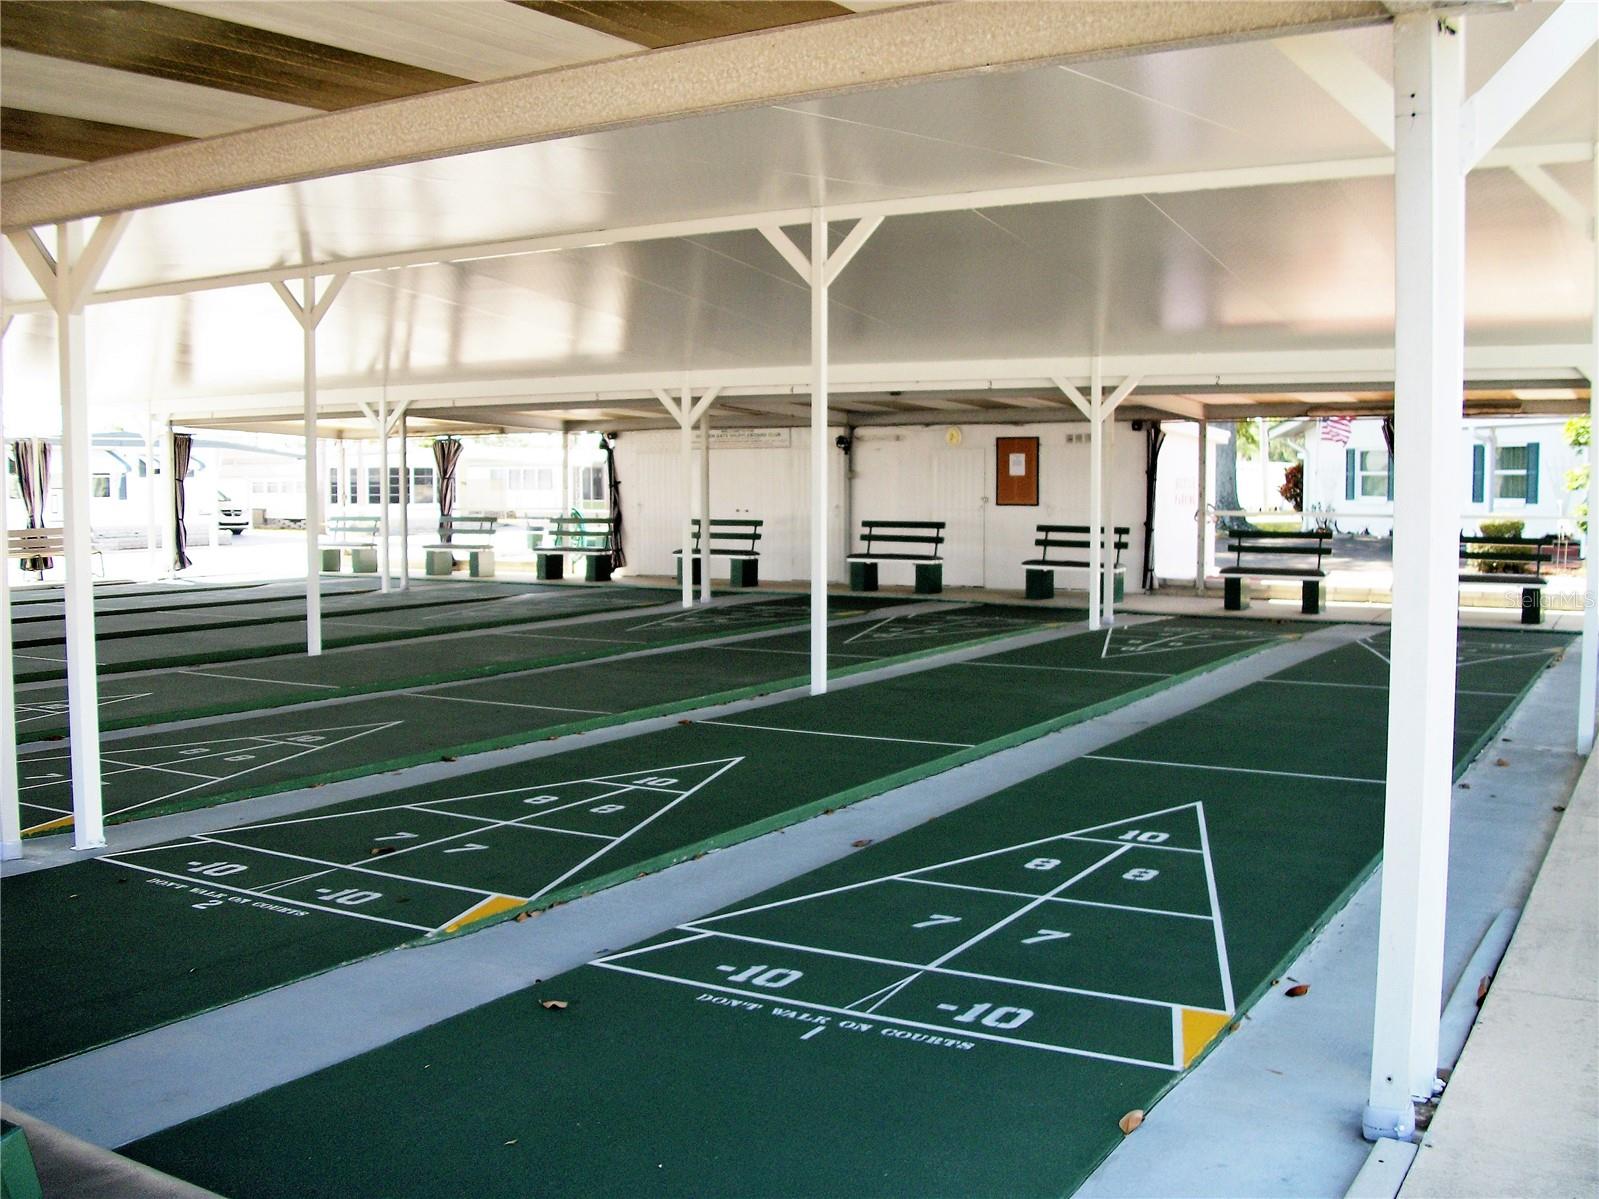 Covered shuffleboard courts to play in all types of weather.